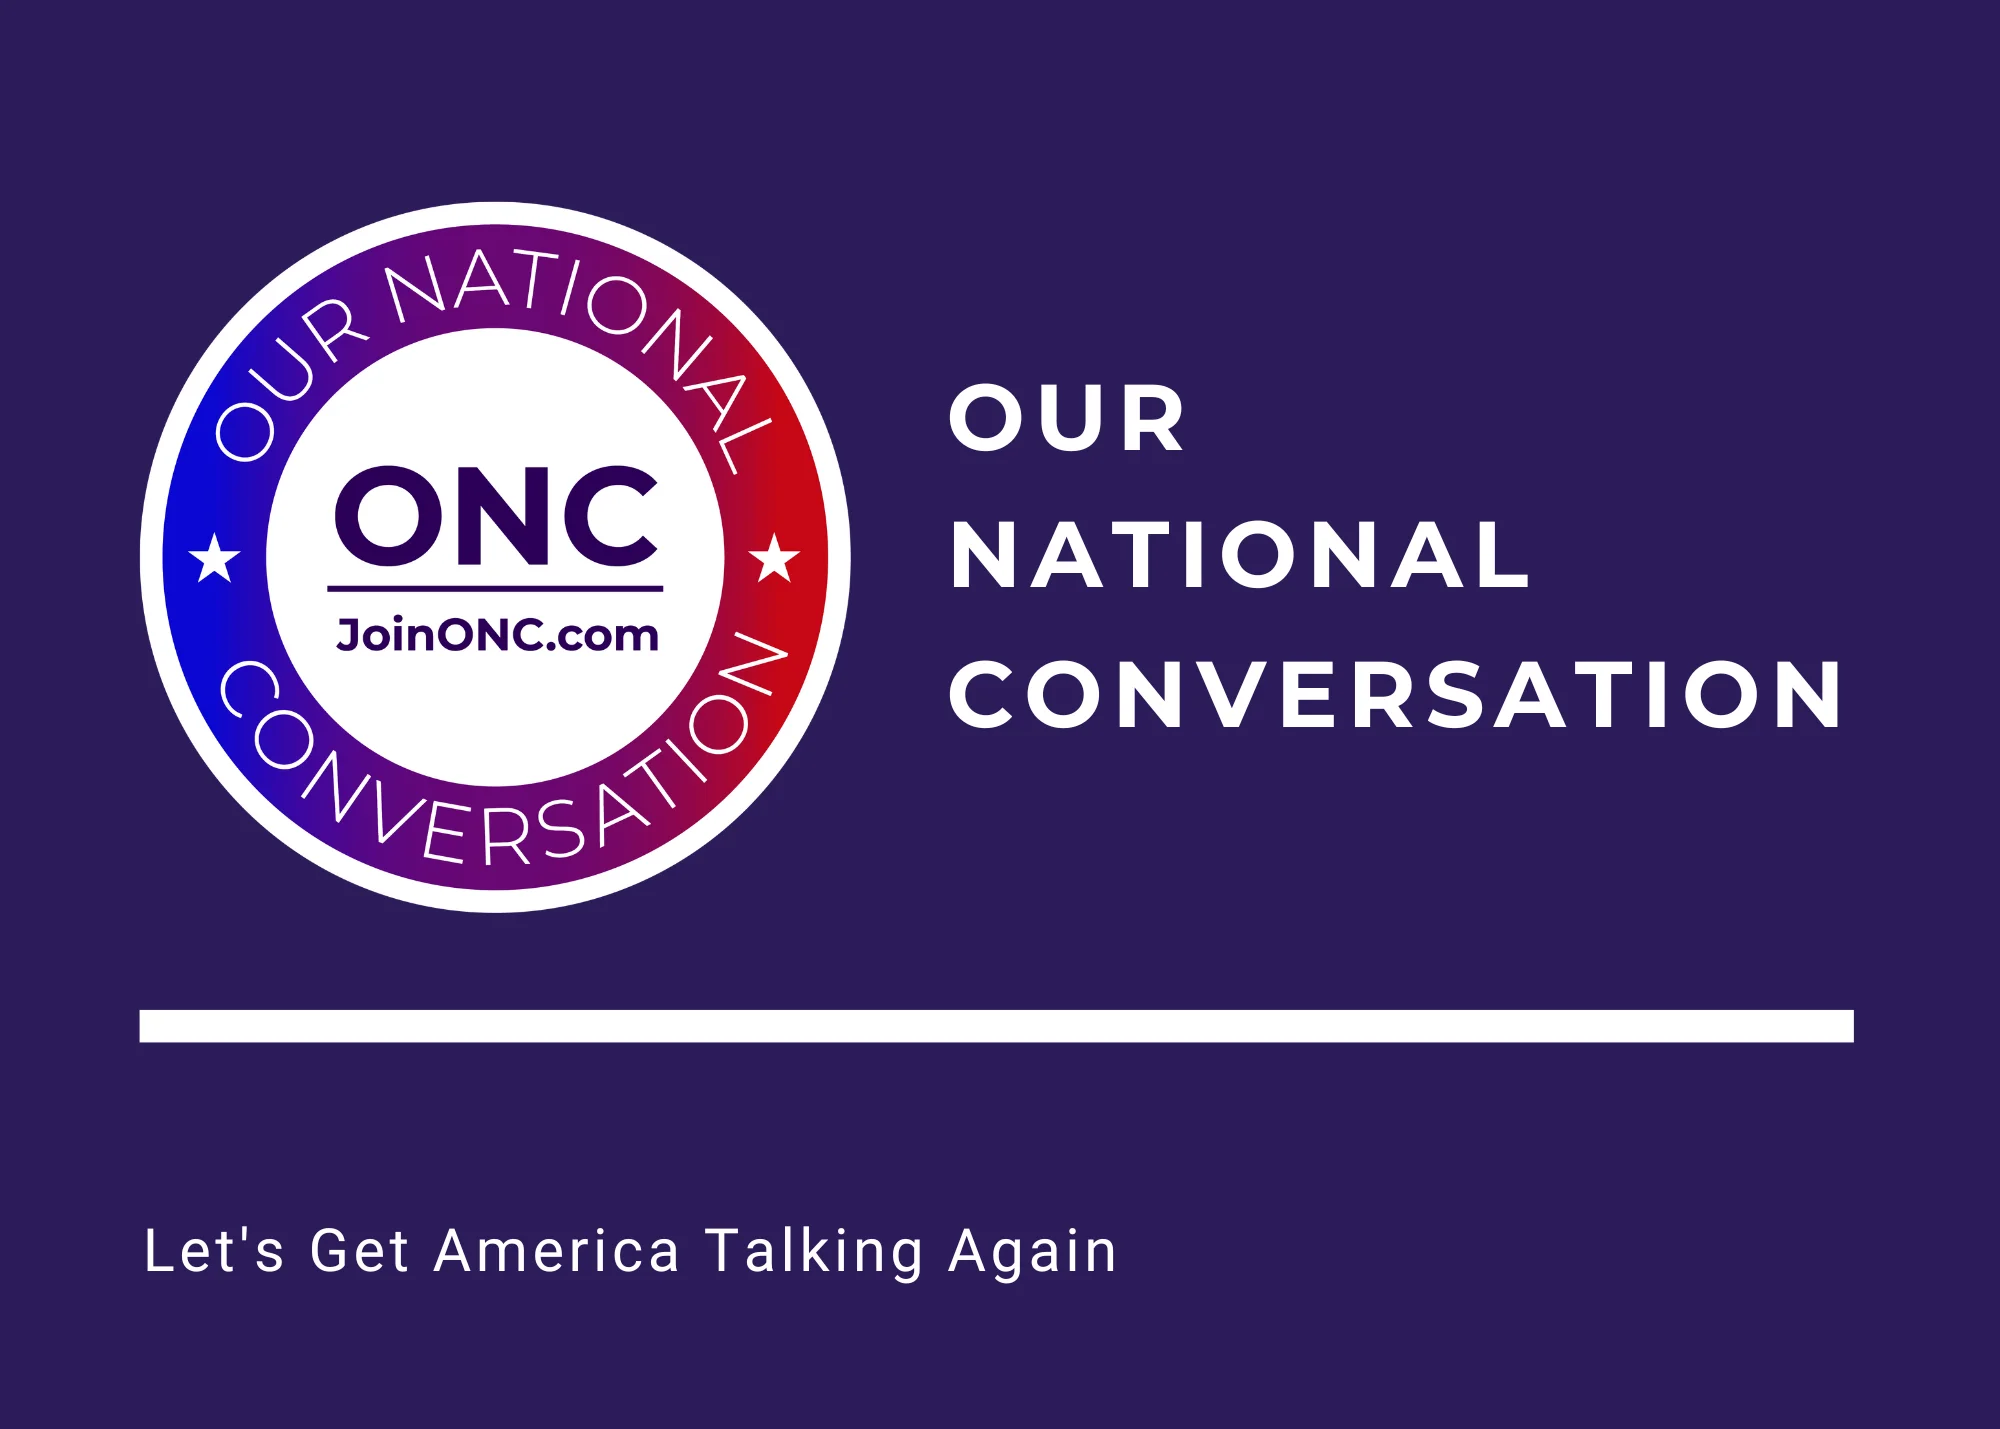 Our National Conversation